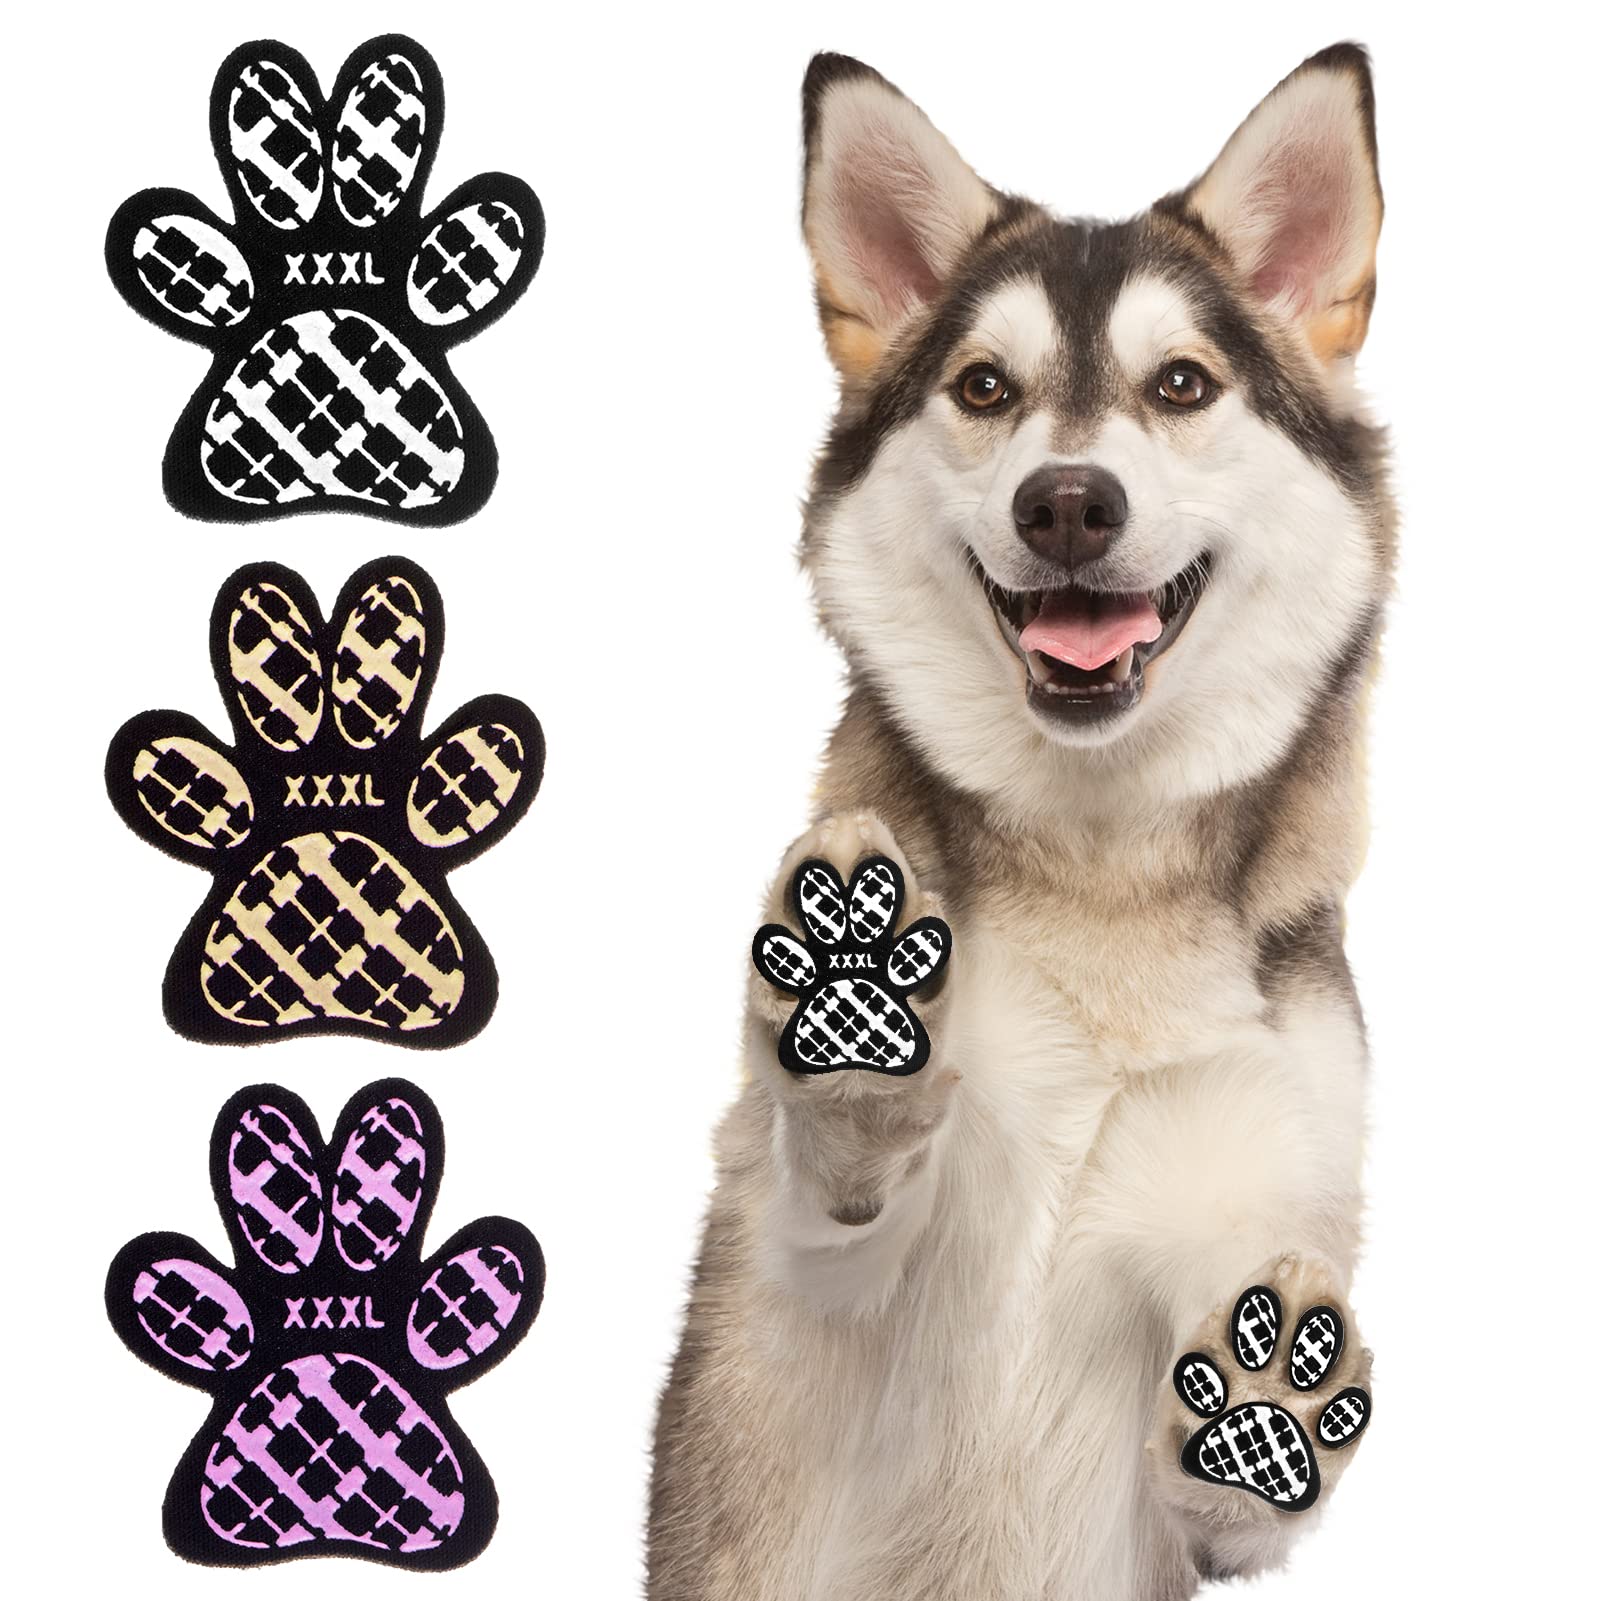 BEAUTYZOO Dog Paw Protectors Grip Pads Anti-Slip Traction for